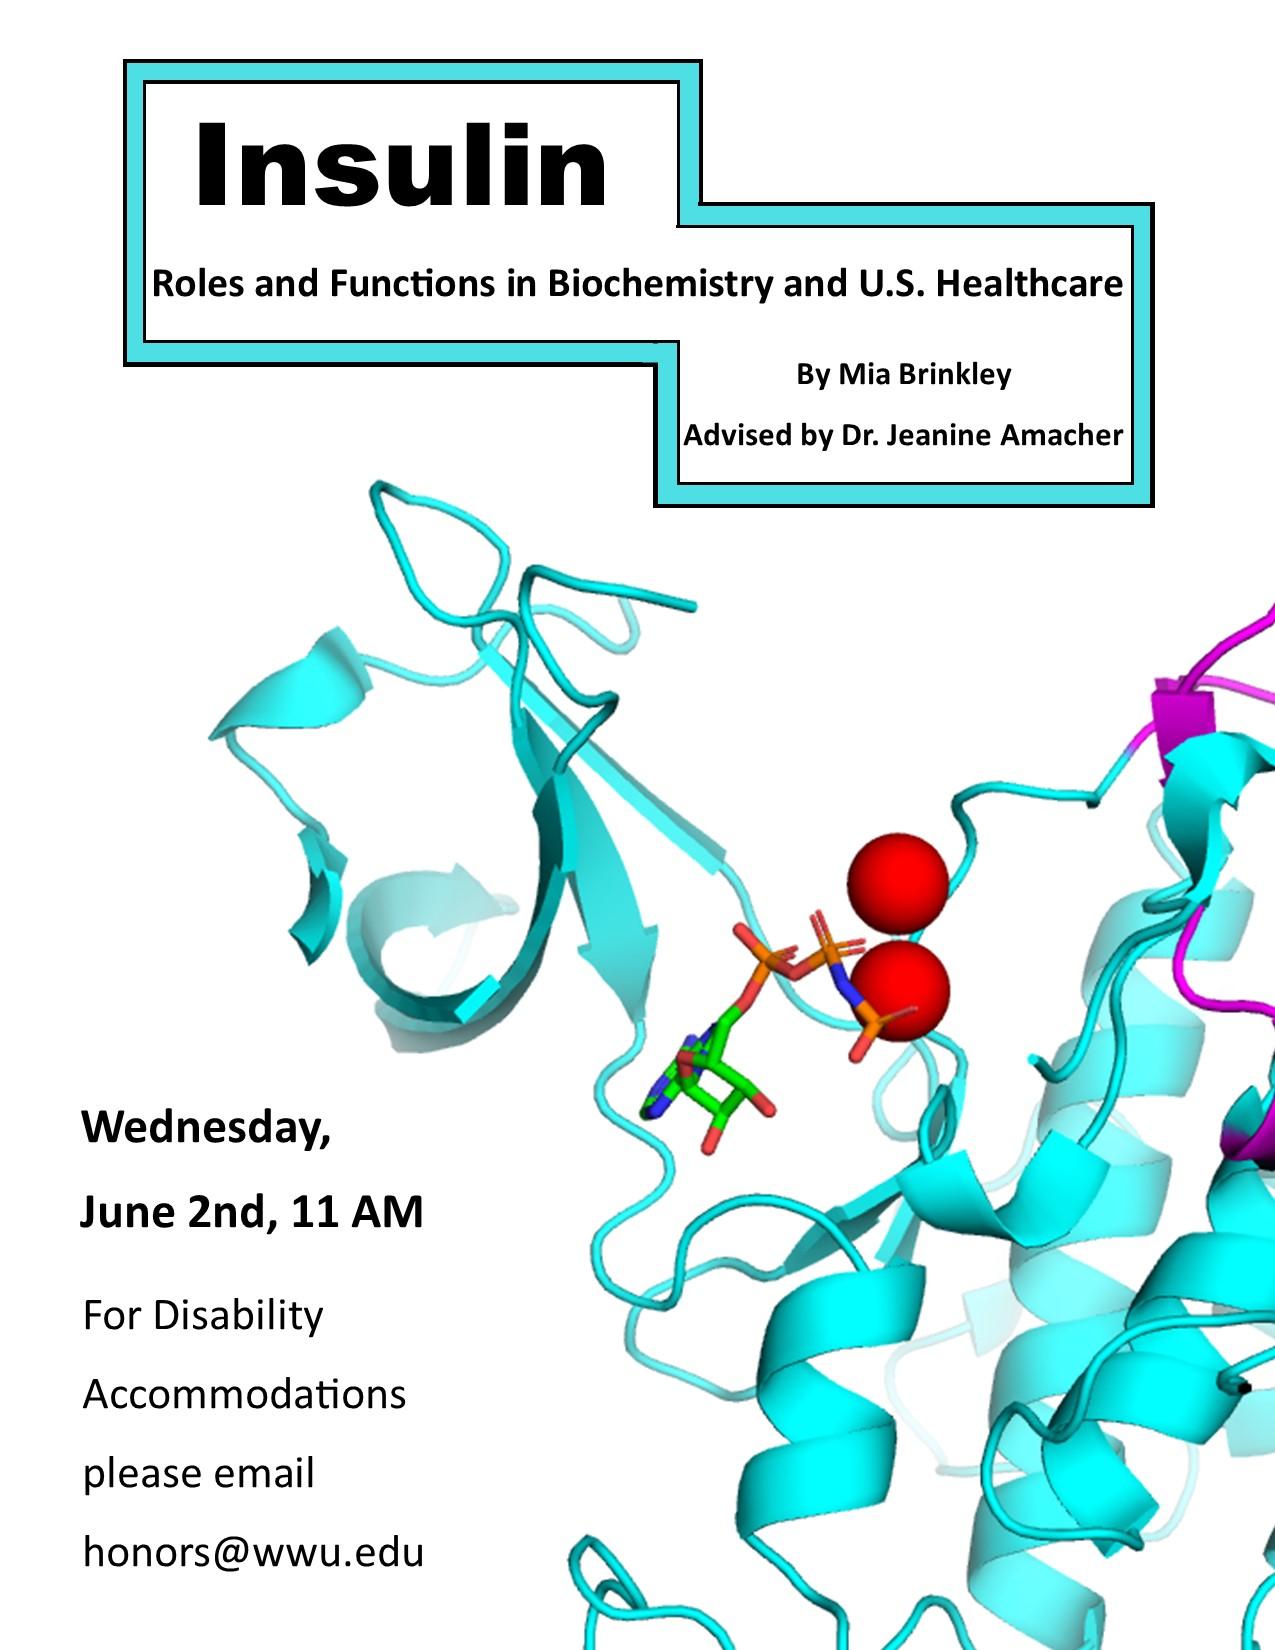 White poster with a multicolored cartoon image of insulin protein. Text reads: "Insulin: Roles and Functions in Biochemistry and U.S. Healthcare. By Mia Brinkley. Advised by Dr. Jeanine Amacher. Wednesday, June 2nd, at 11 am. For Disability Accommodations, please email honors@wwu.edu".